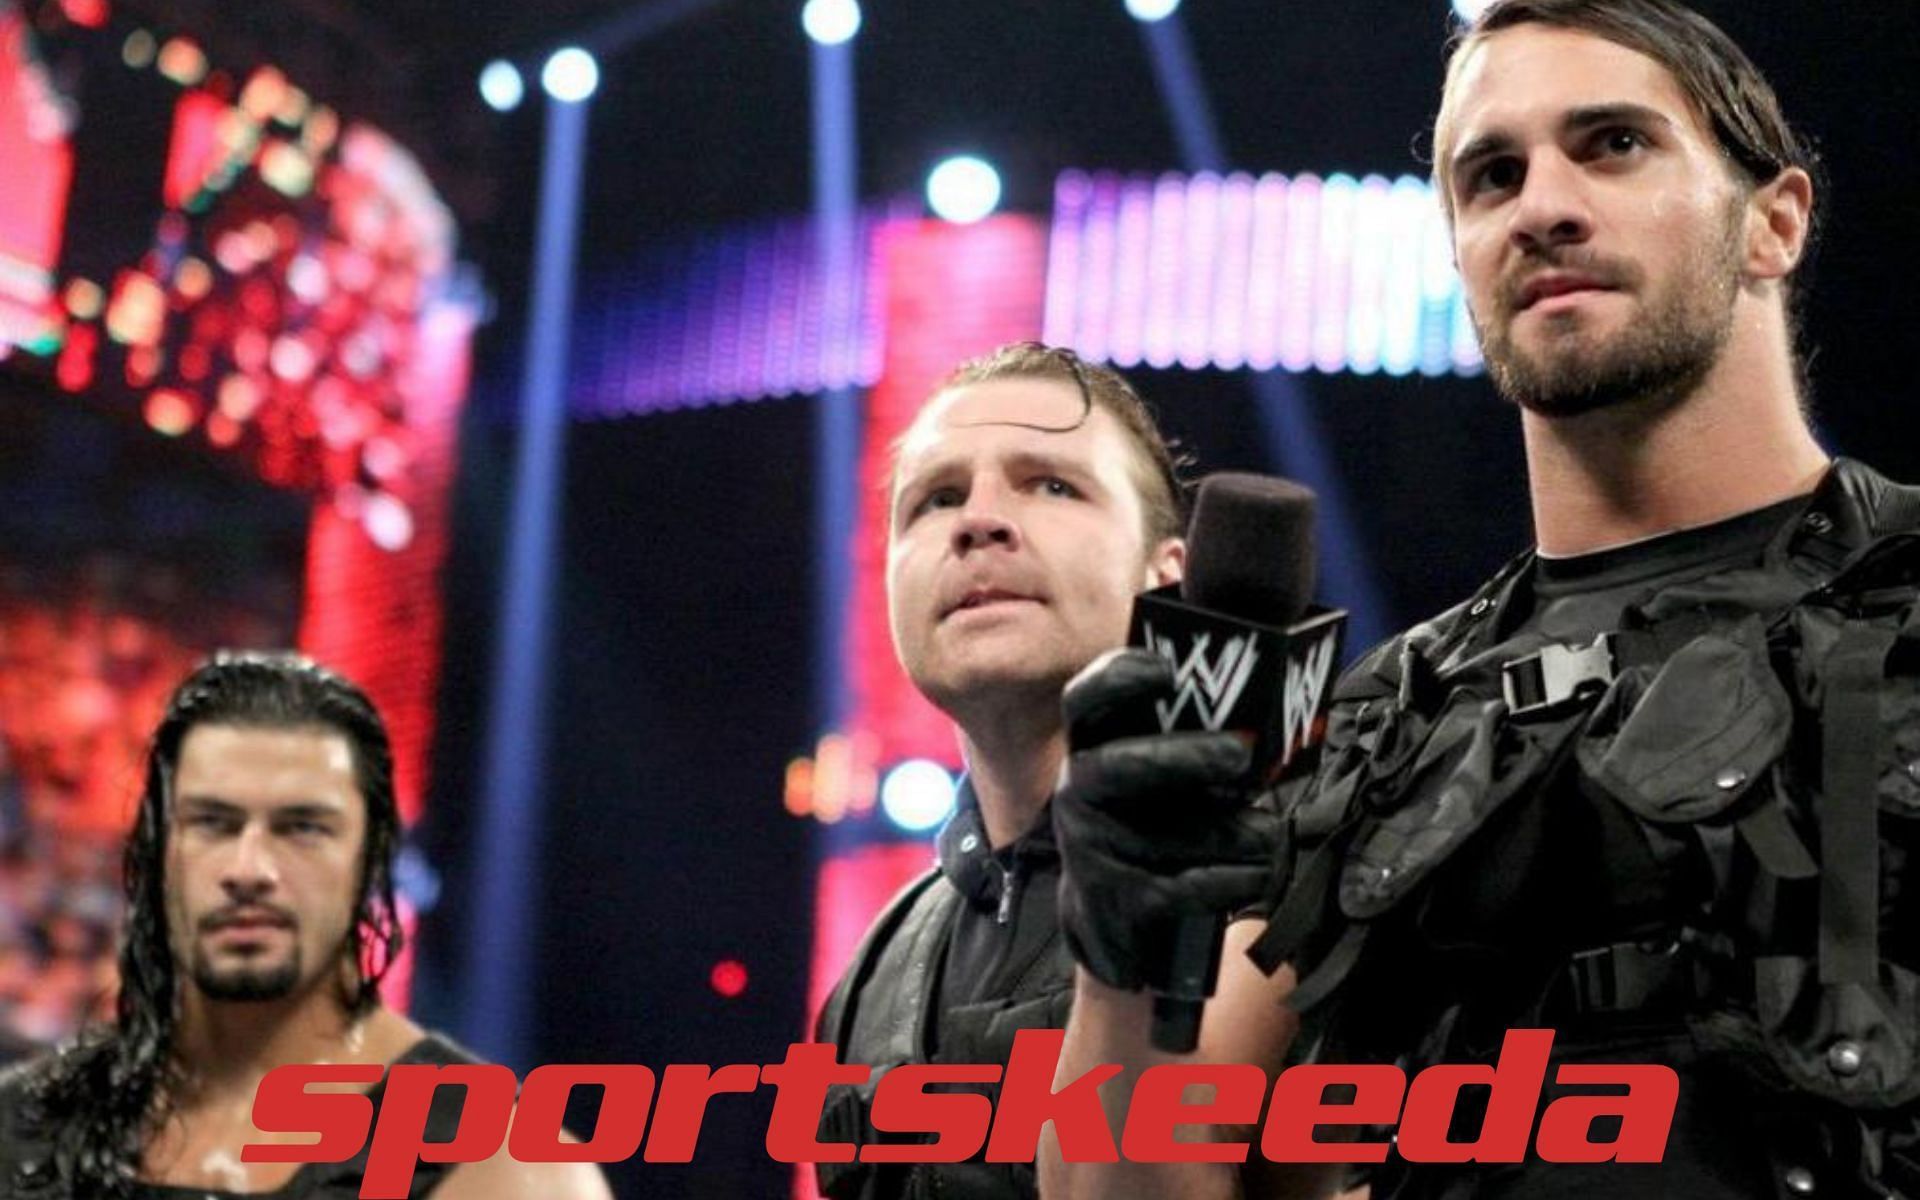 The Shield became one of the greatest WWE stables of all-time.